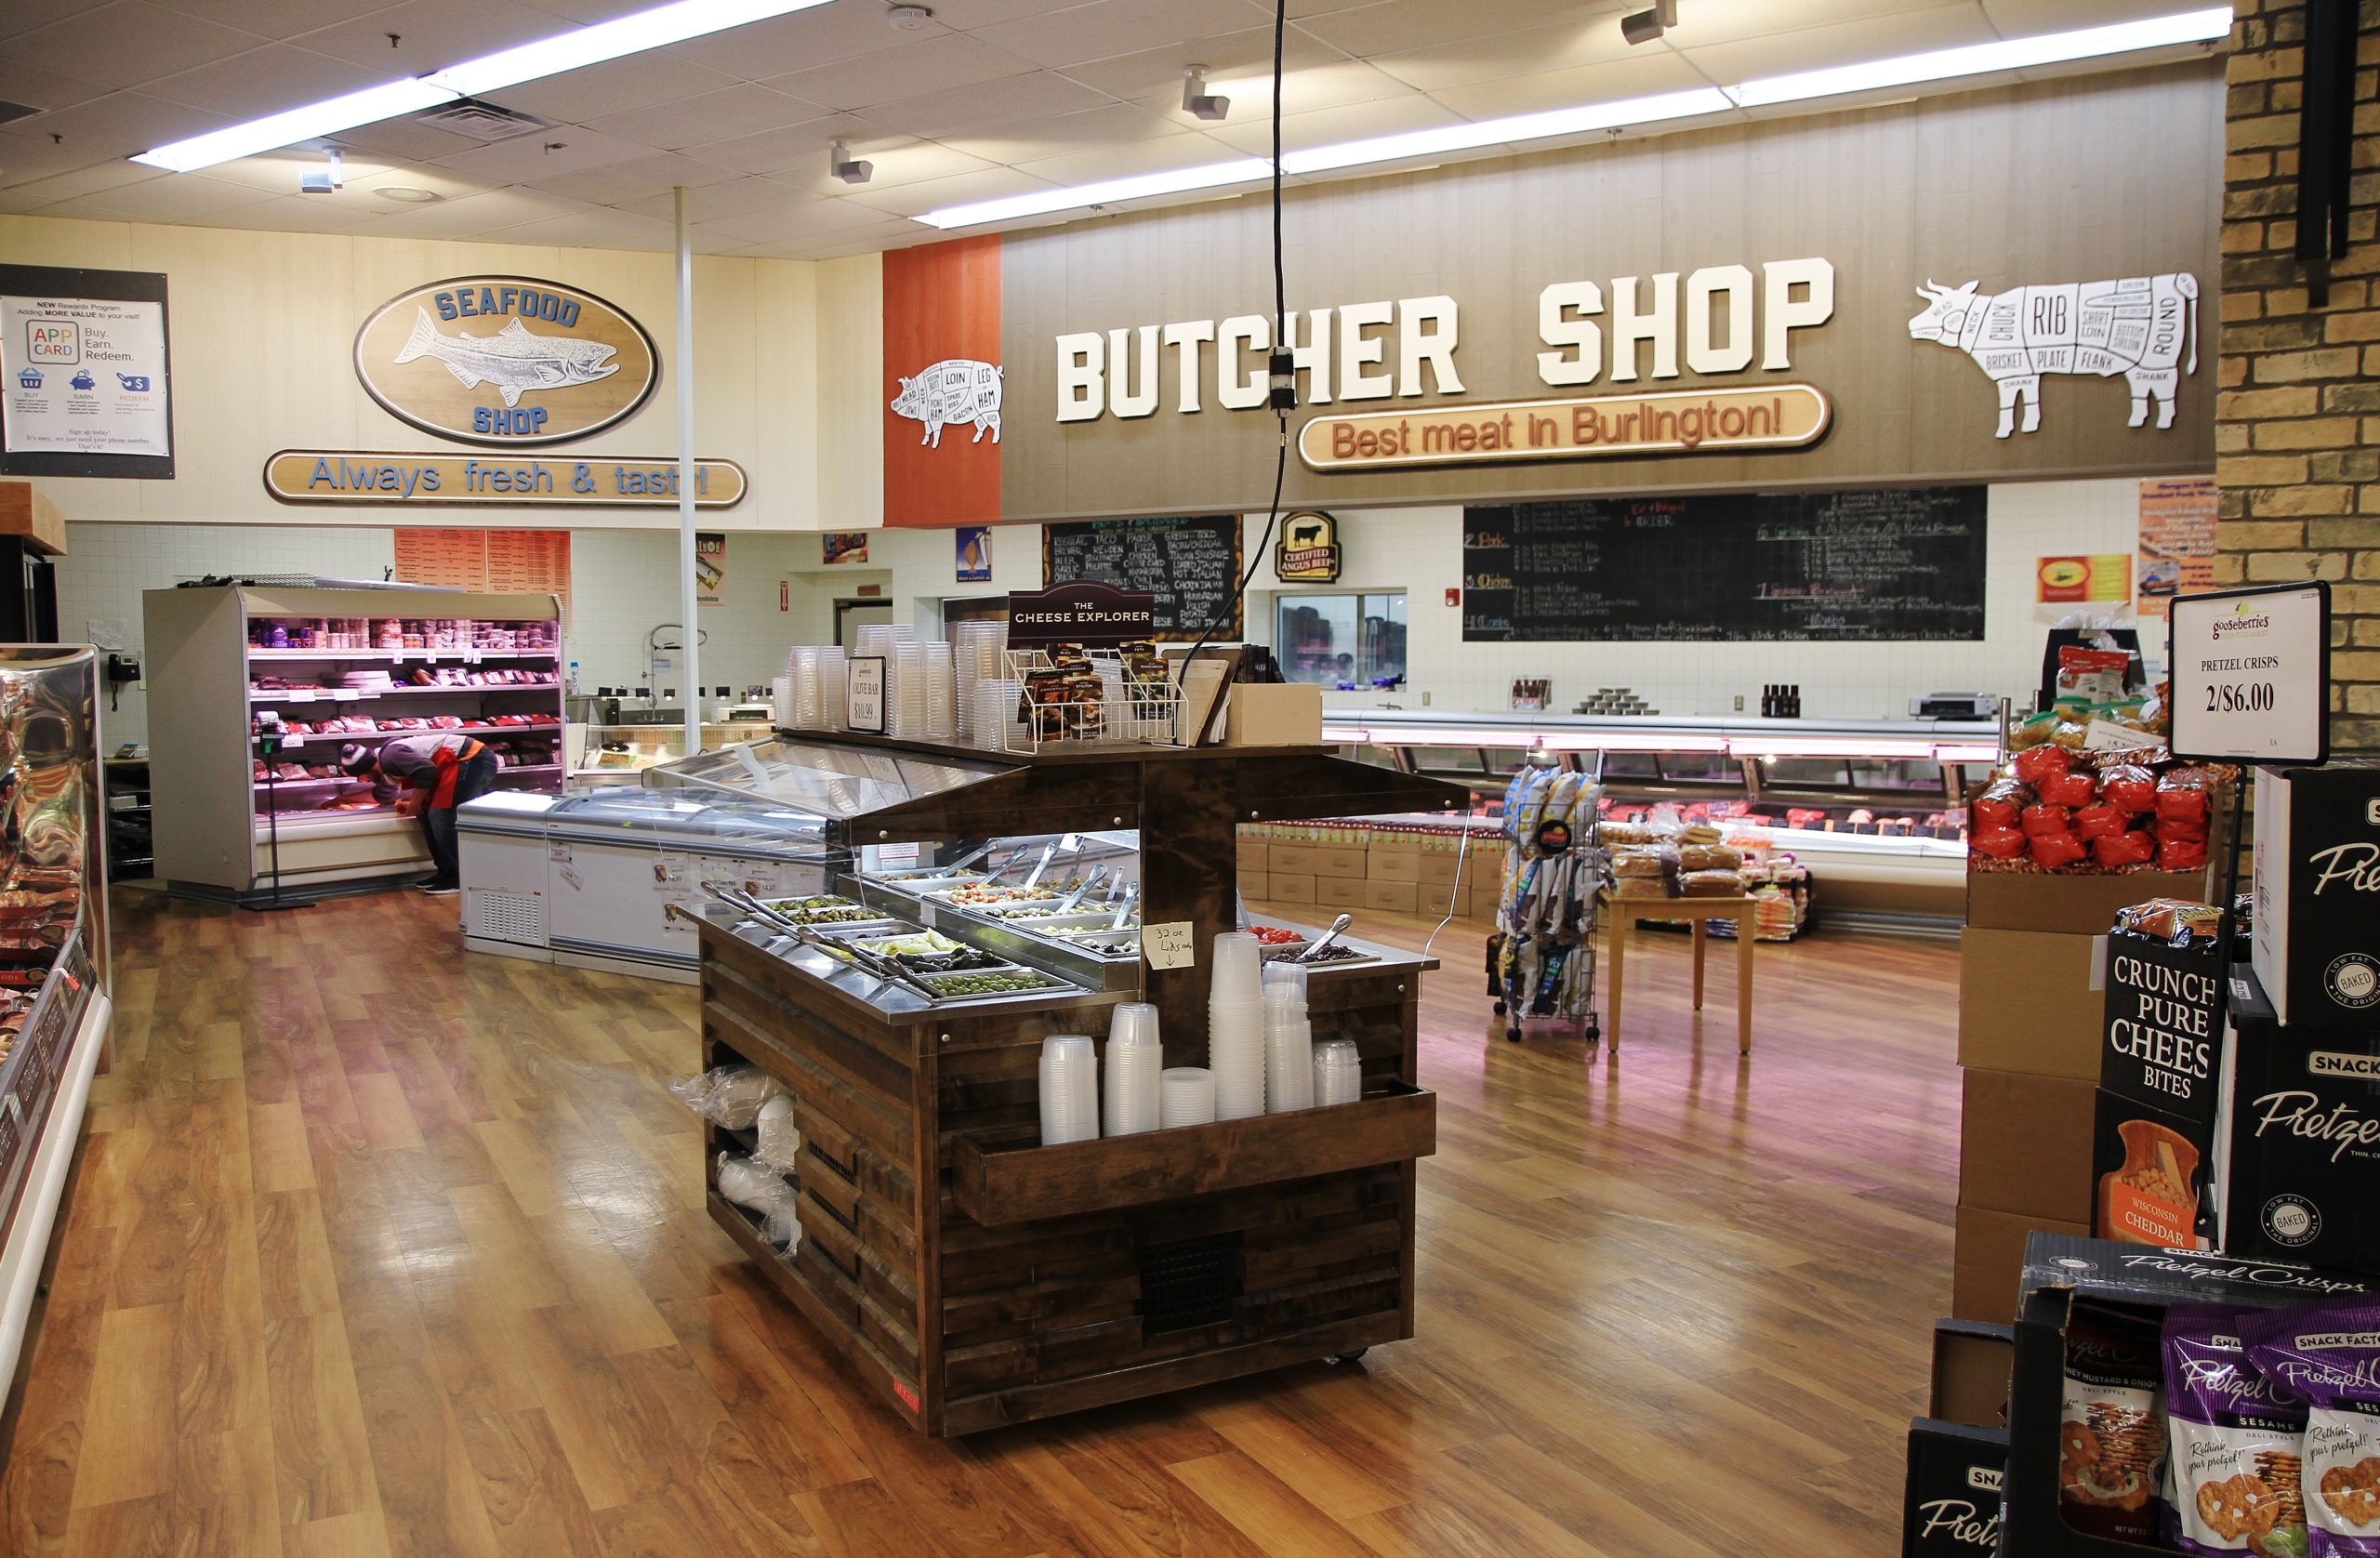 StoreMasters custom lighting and flooring package updated this home town store into a food lovers destination